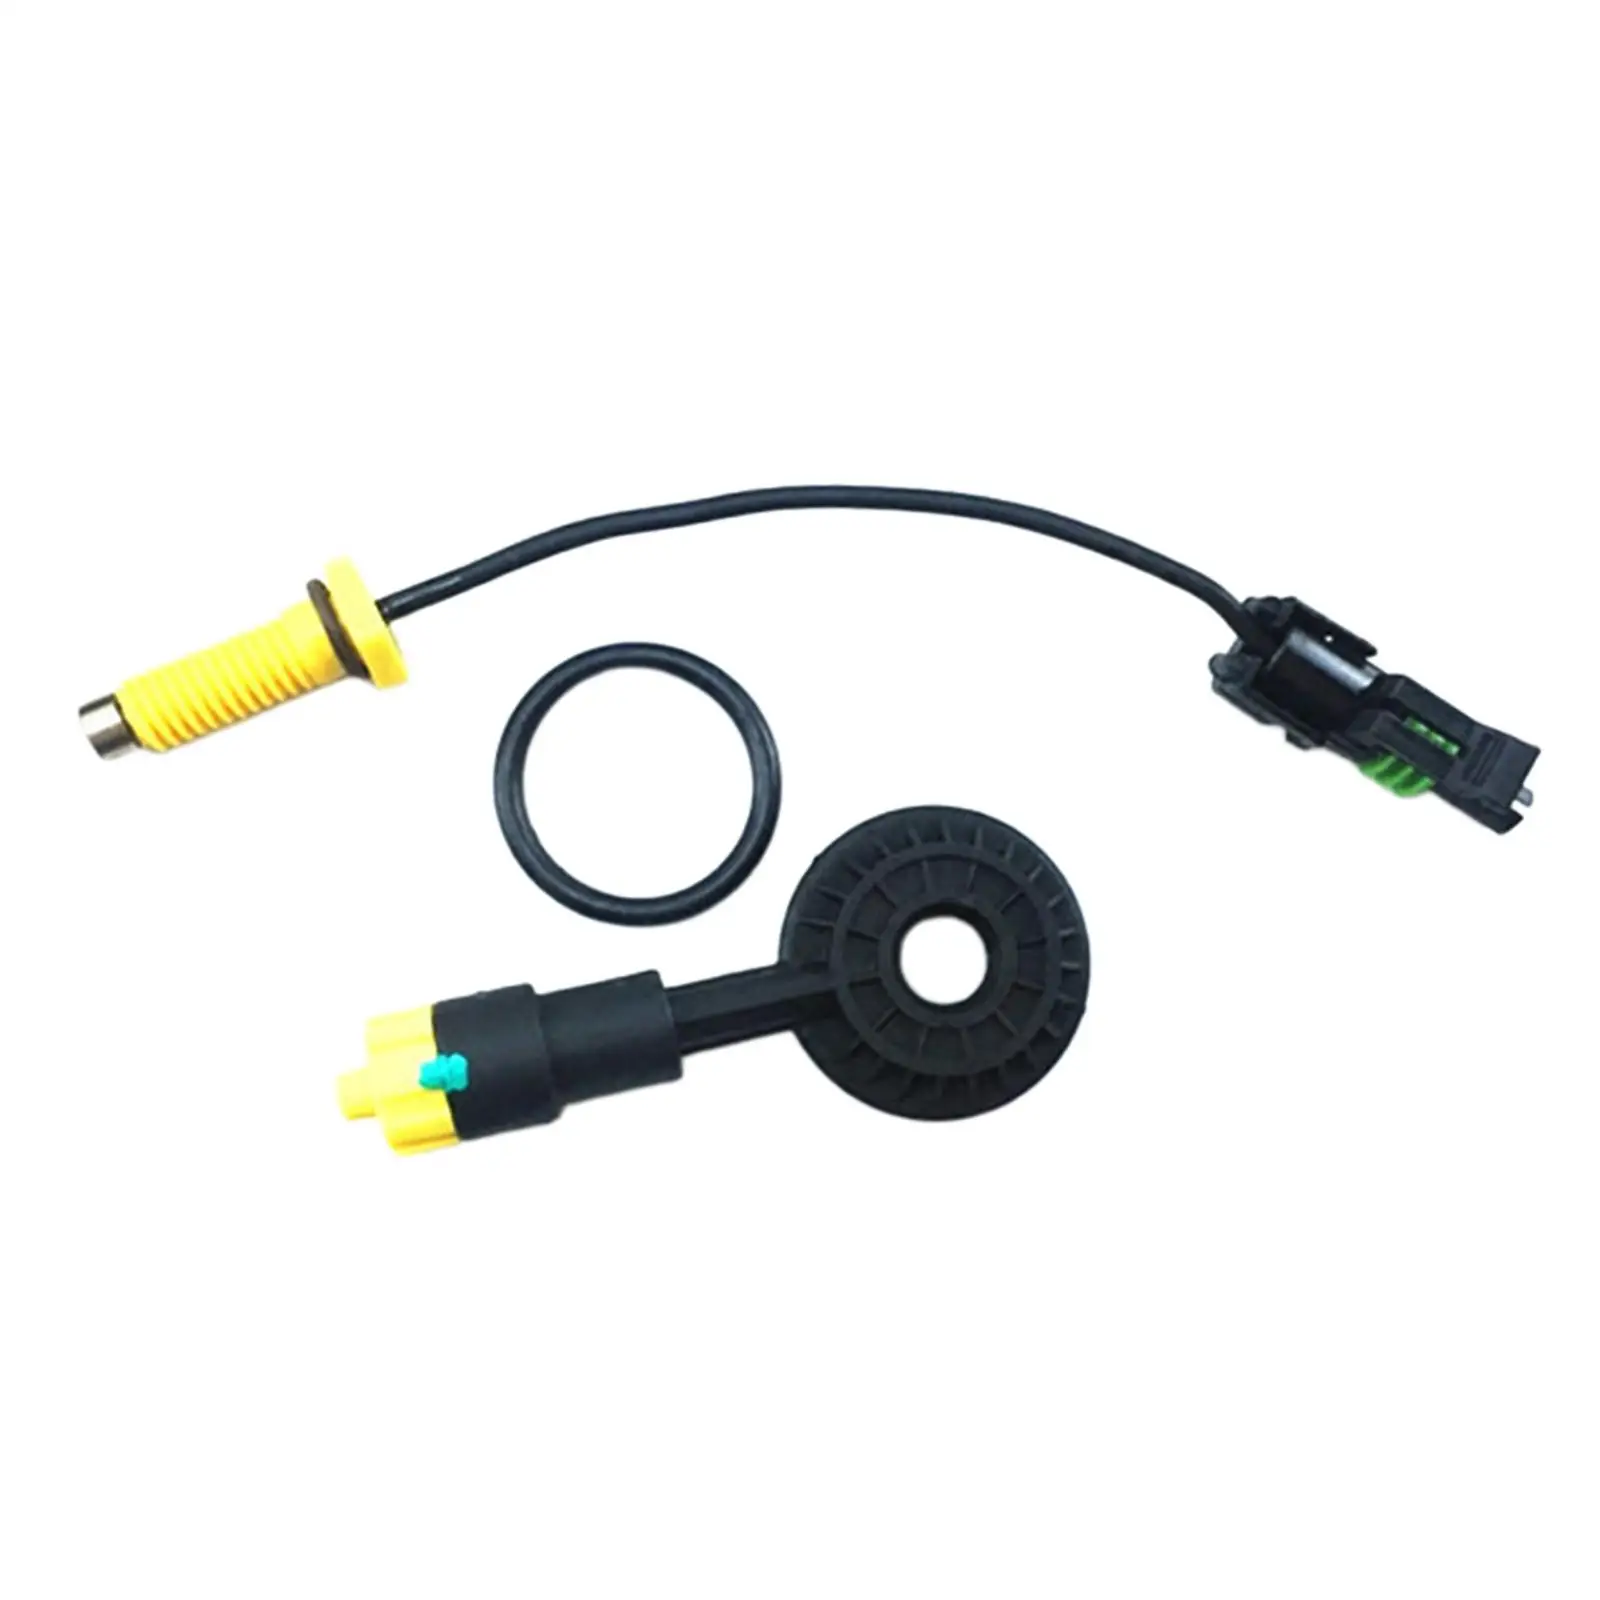 3X Black Fuel Water Sensor for DISCOVERY 3 Vehicle Part